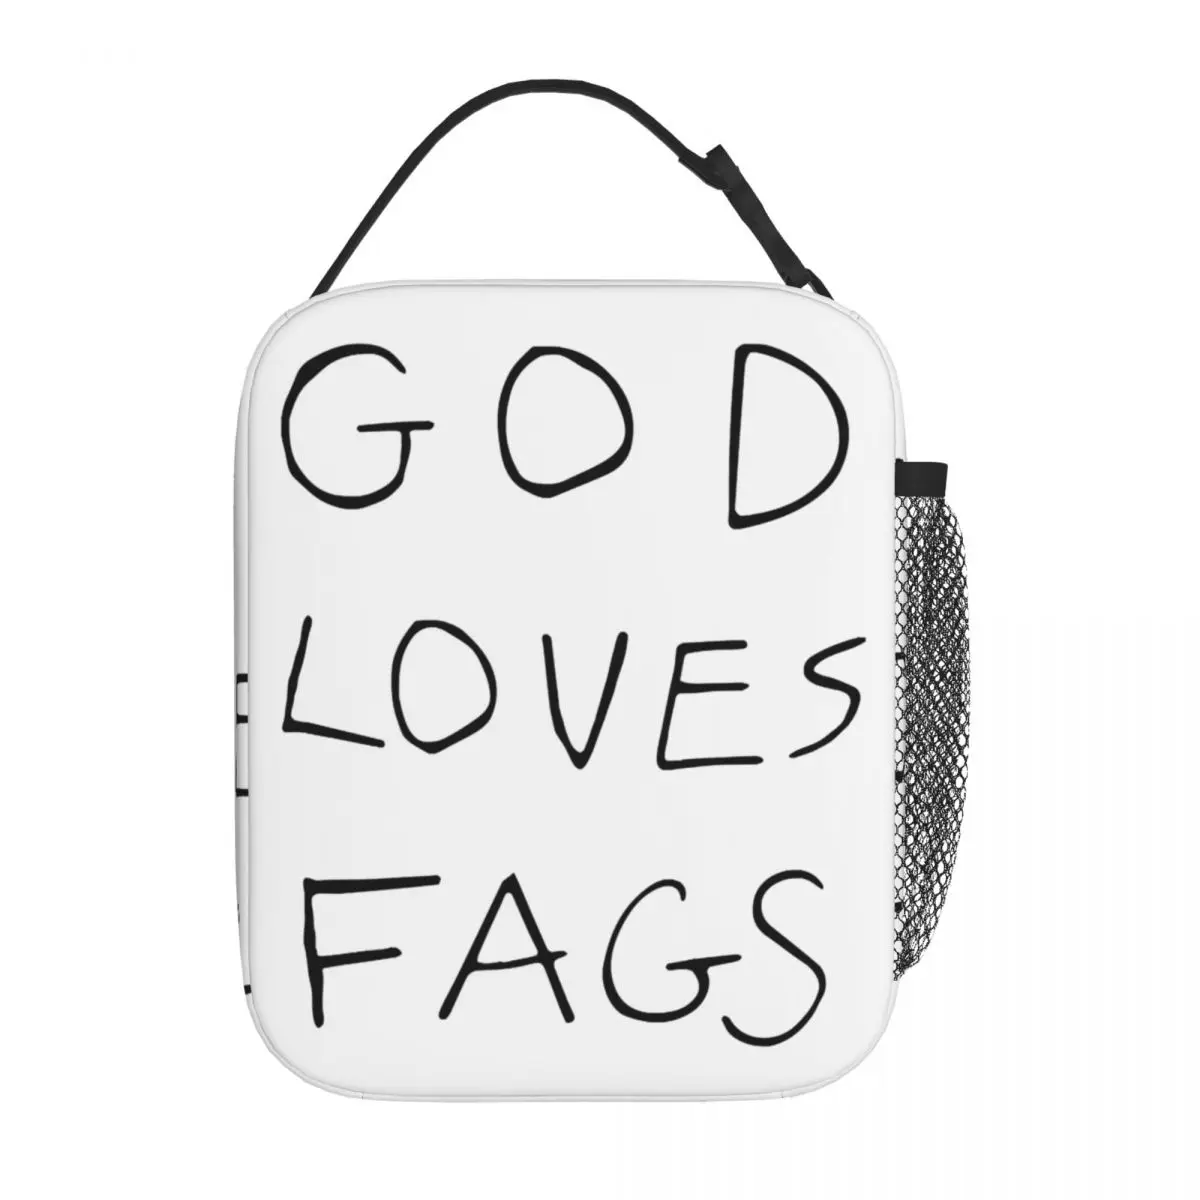 

God Loves Fags Shameless Ian Gallagher Merch Insulated Lunch Tote Bag School Storage Food Box New Cooler Thermal Bento Box